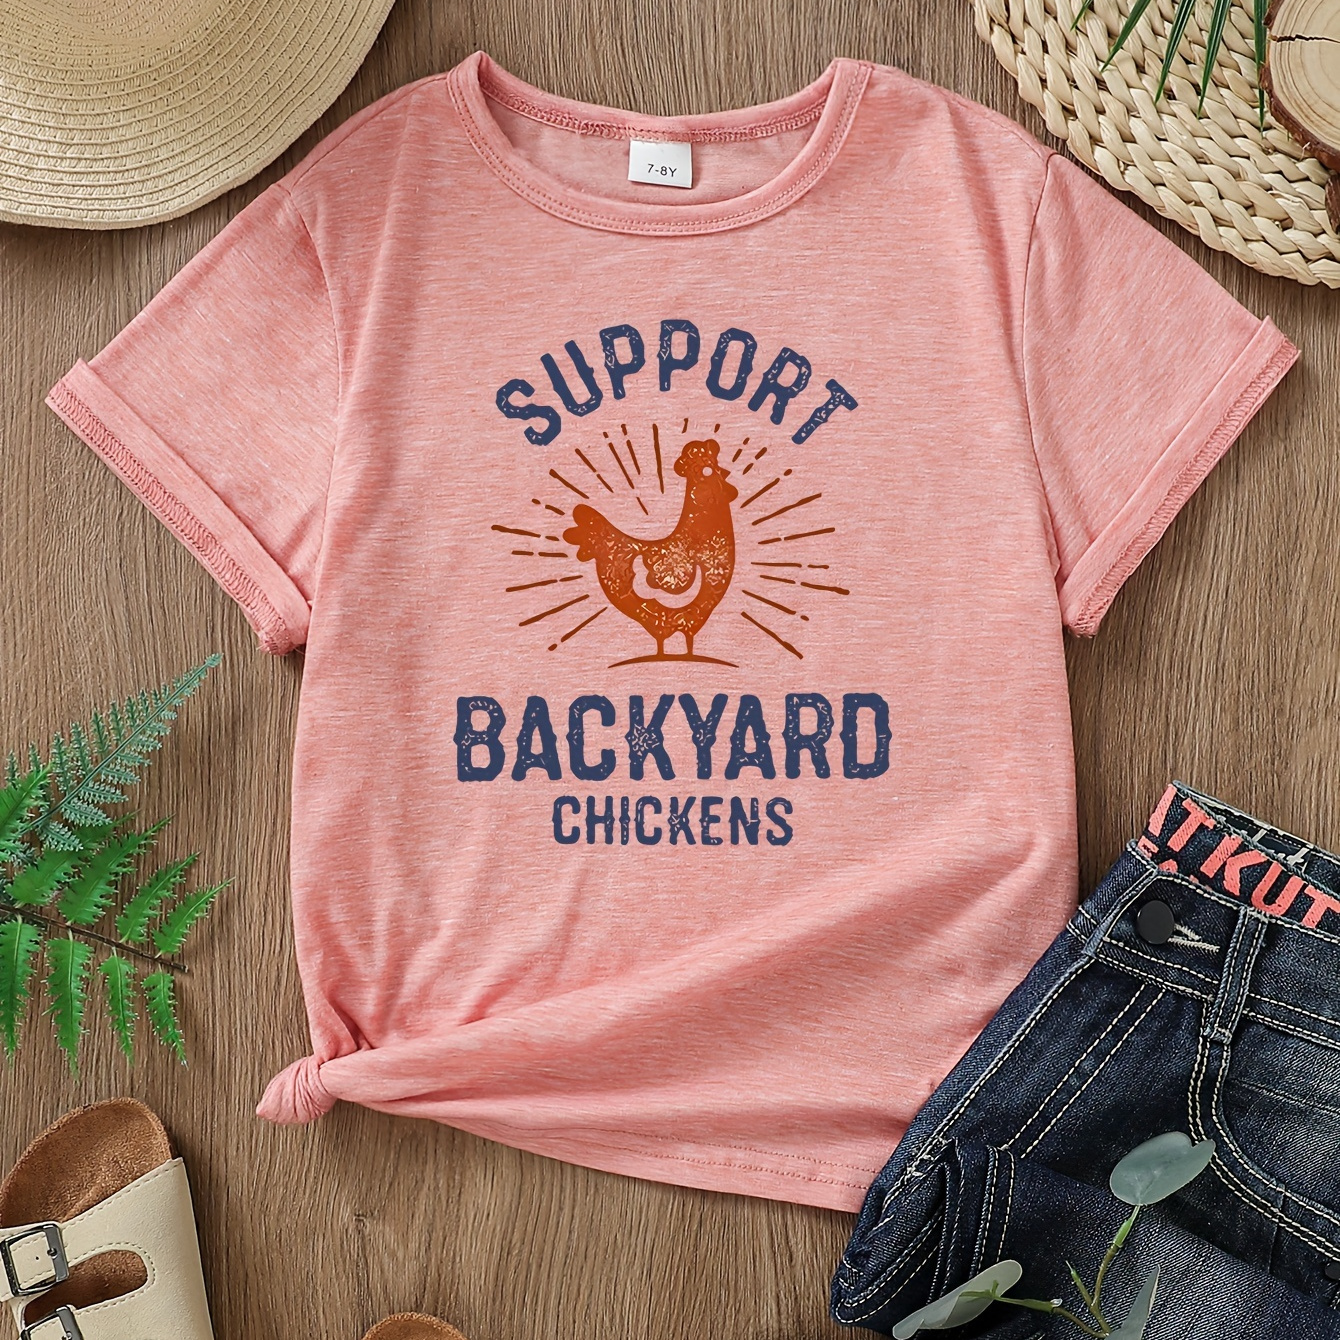 

Girls Summer Casual Fashion Support Backyard Chickens Printed T-shirt Top, Short Sleeves, Round Neck, Comfort Fit - Youthful Style